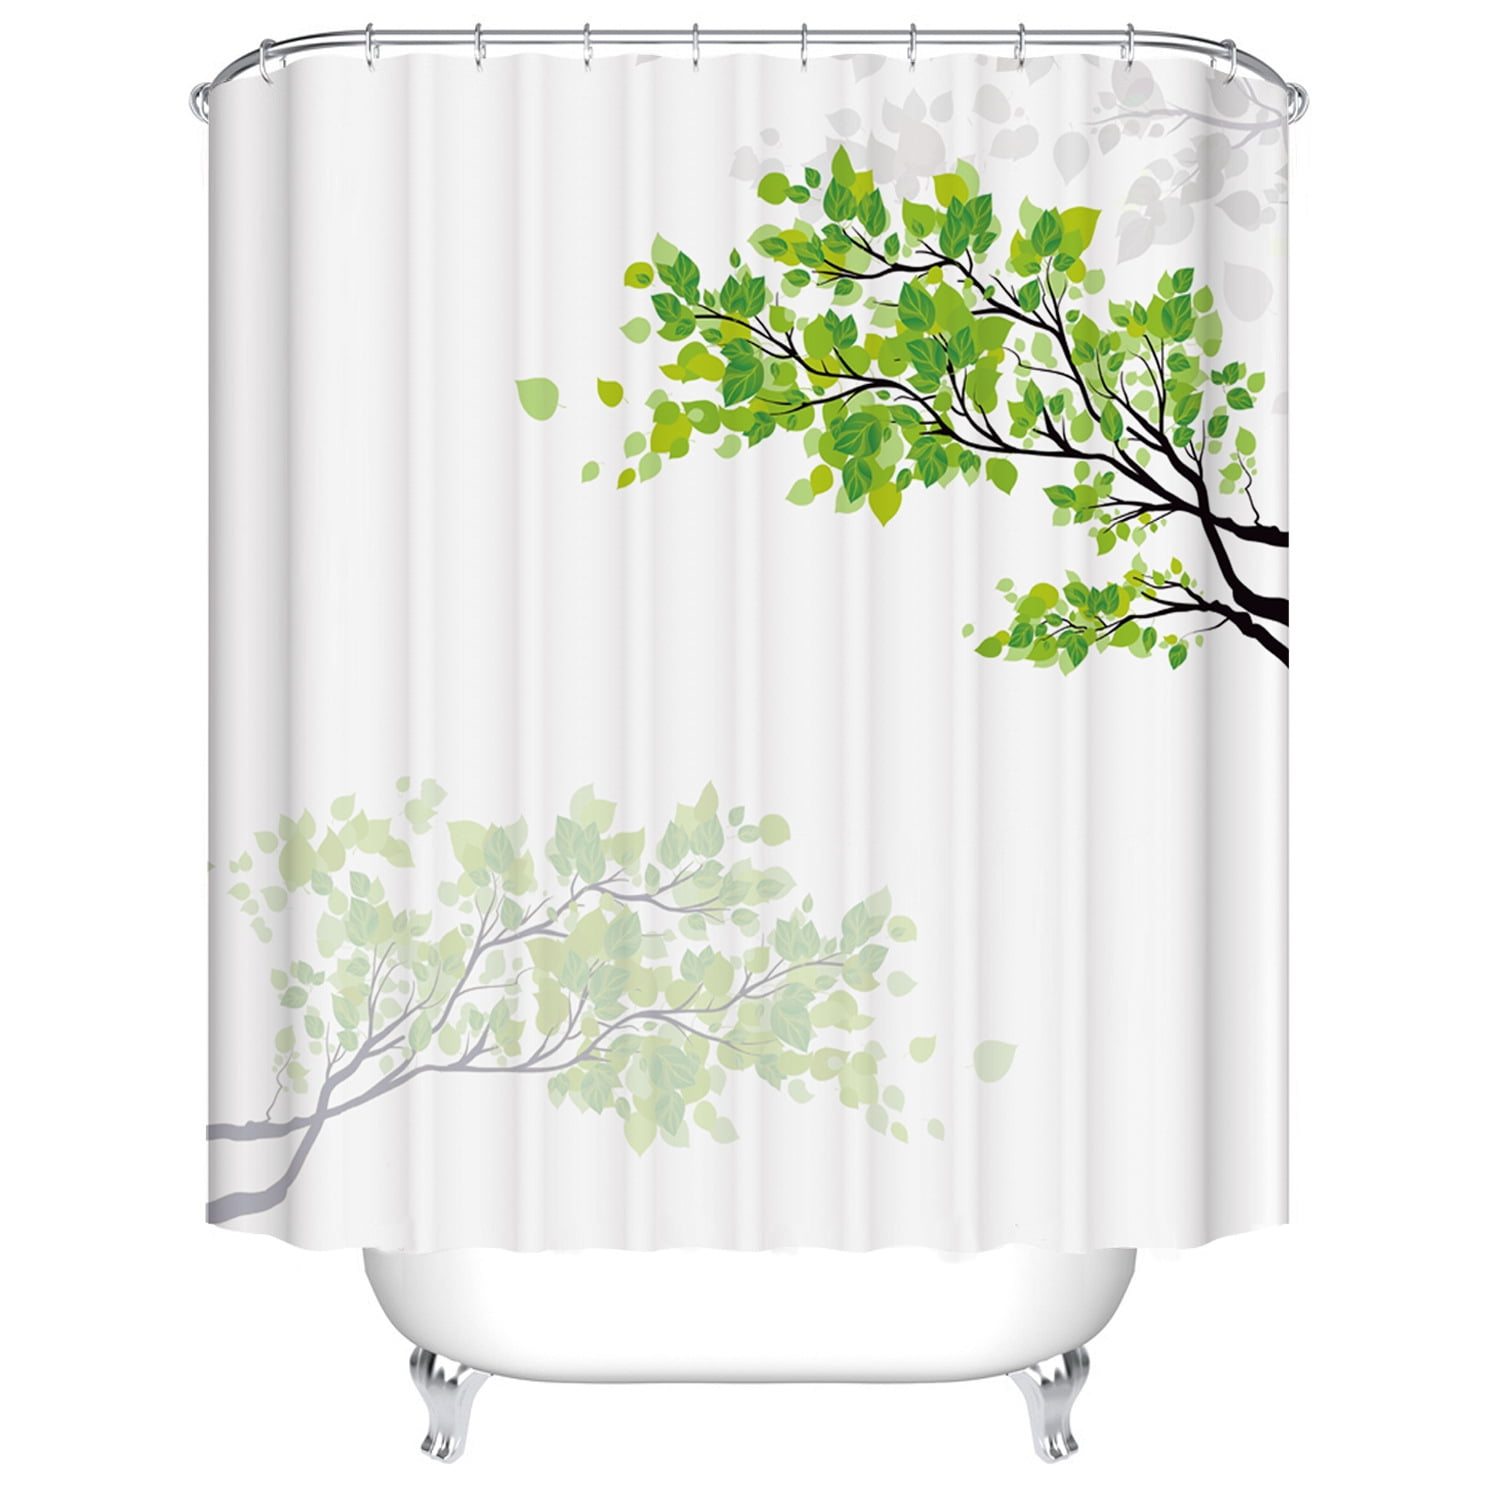 Waterproof Shower Curtain 71x71in Hook Included Ployester Machine Washable